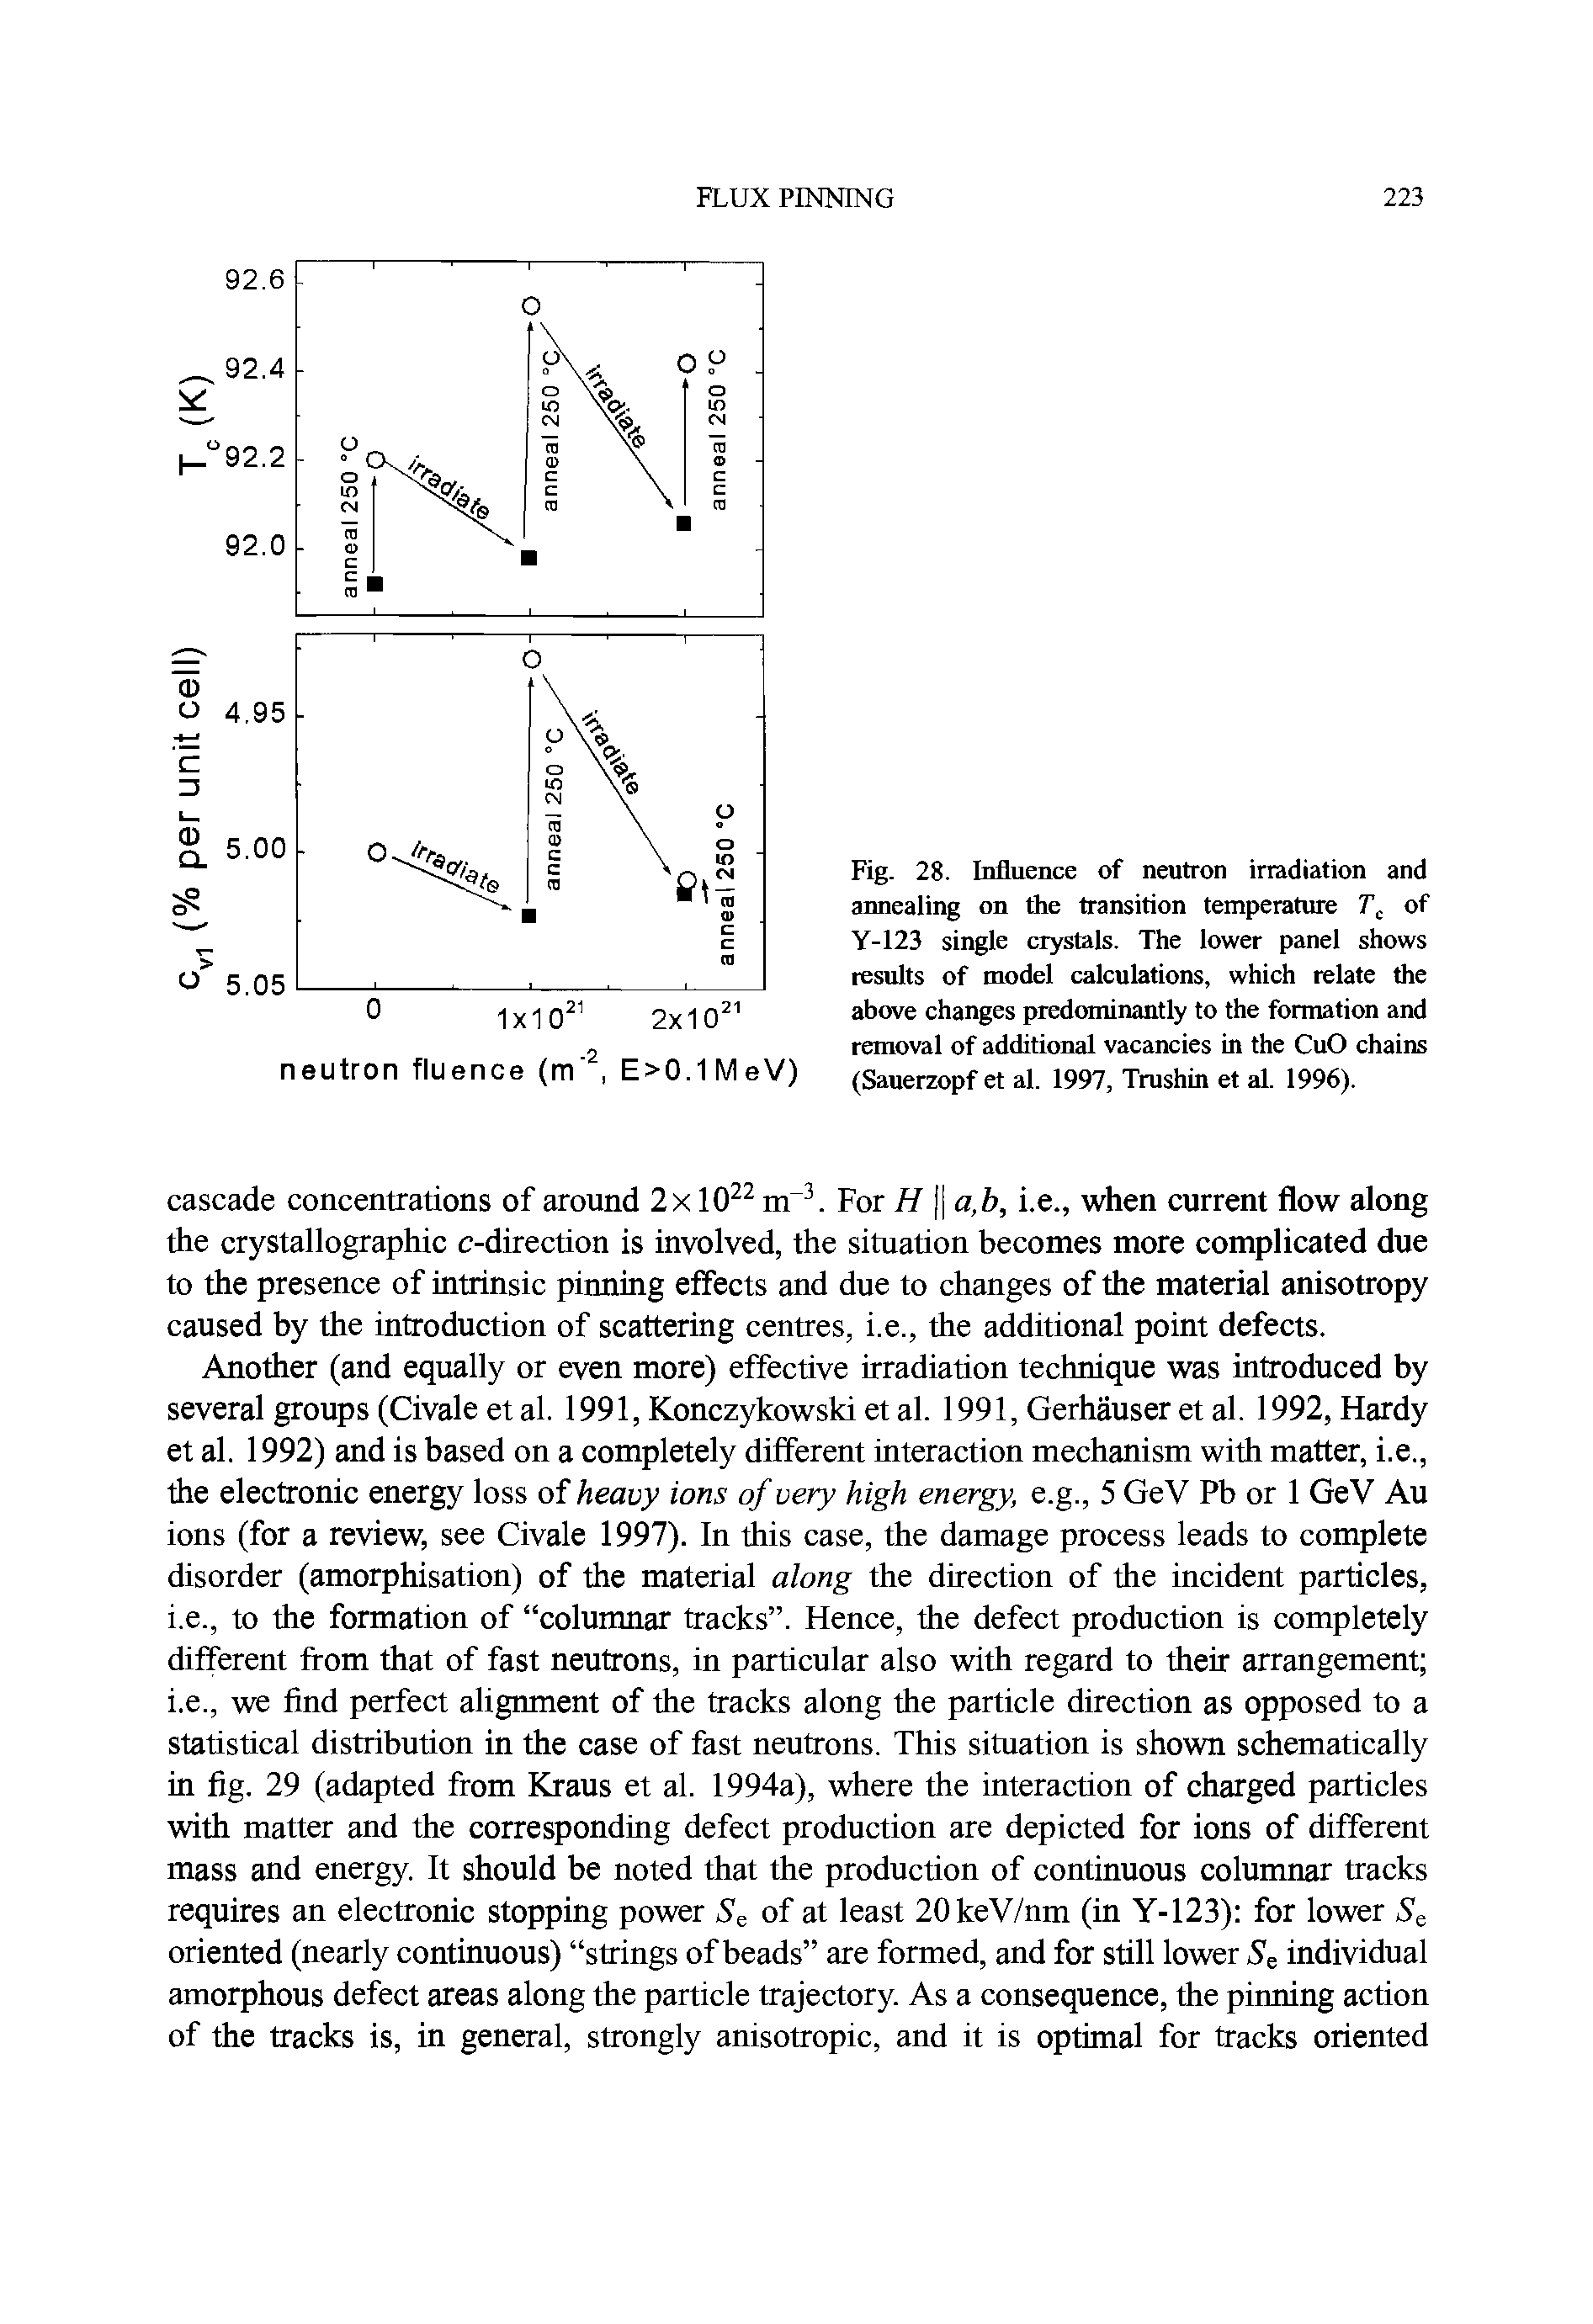 Fig. 28. Influence of neutron irradiation and annealing on the transition temperature of Y-123 single crystals. The lower panel shows results of model calculations, which relate the above changes predominantly to the formation and removal of additional vacancies in the CuO chains (Sauerzopf et al. 1997, Trushin et al. 1996).